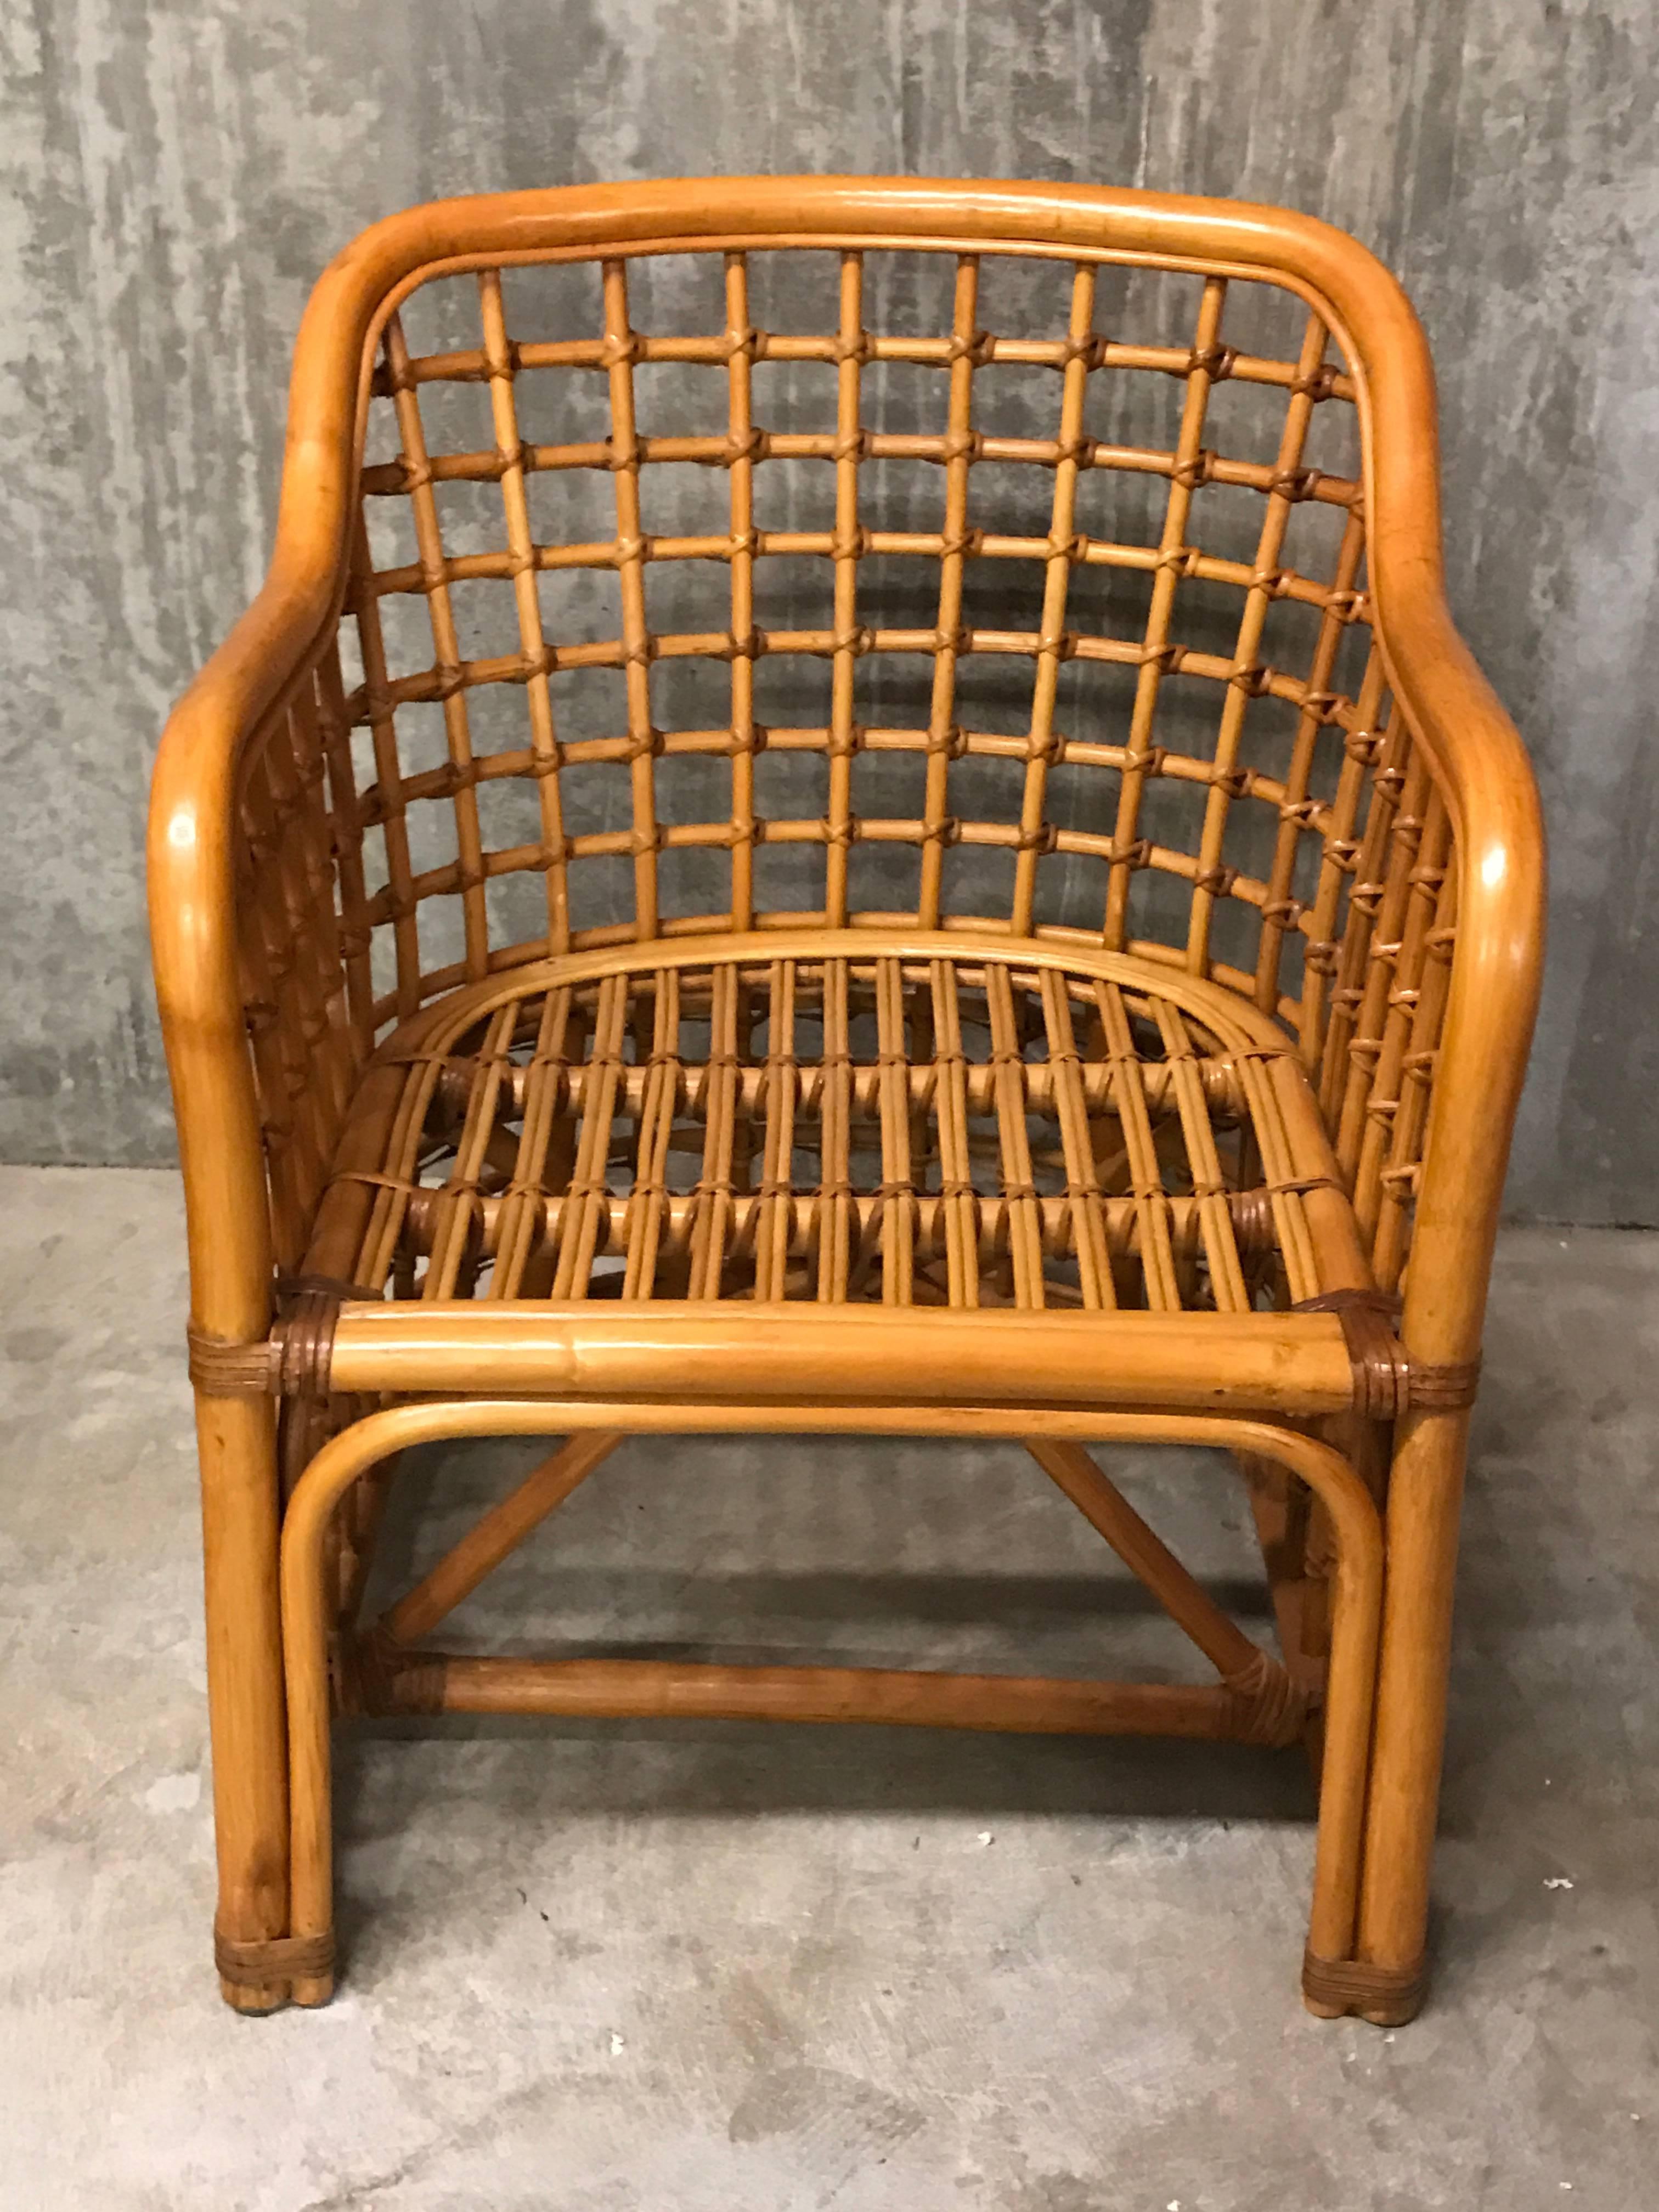 A great pair of sturdy exquisite woven rattan club chairs in the style of Franco Albini. We have a second pair available, please inquire. This item is in our NJ Location, Not Atlanta.